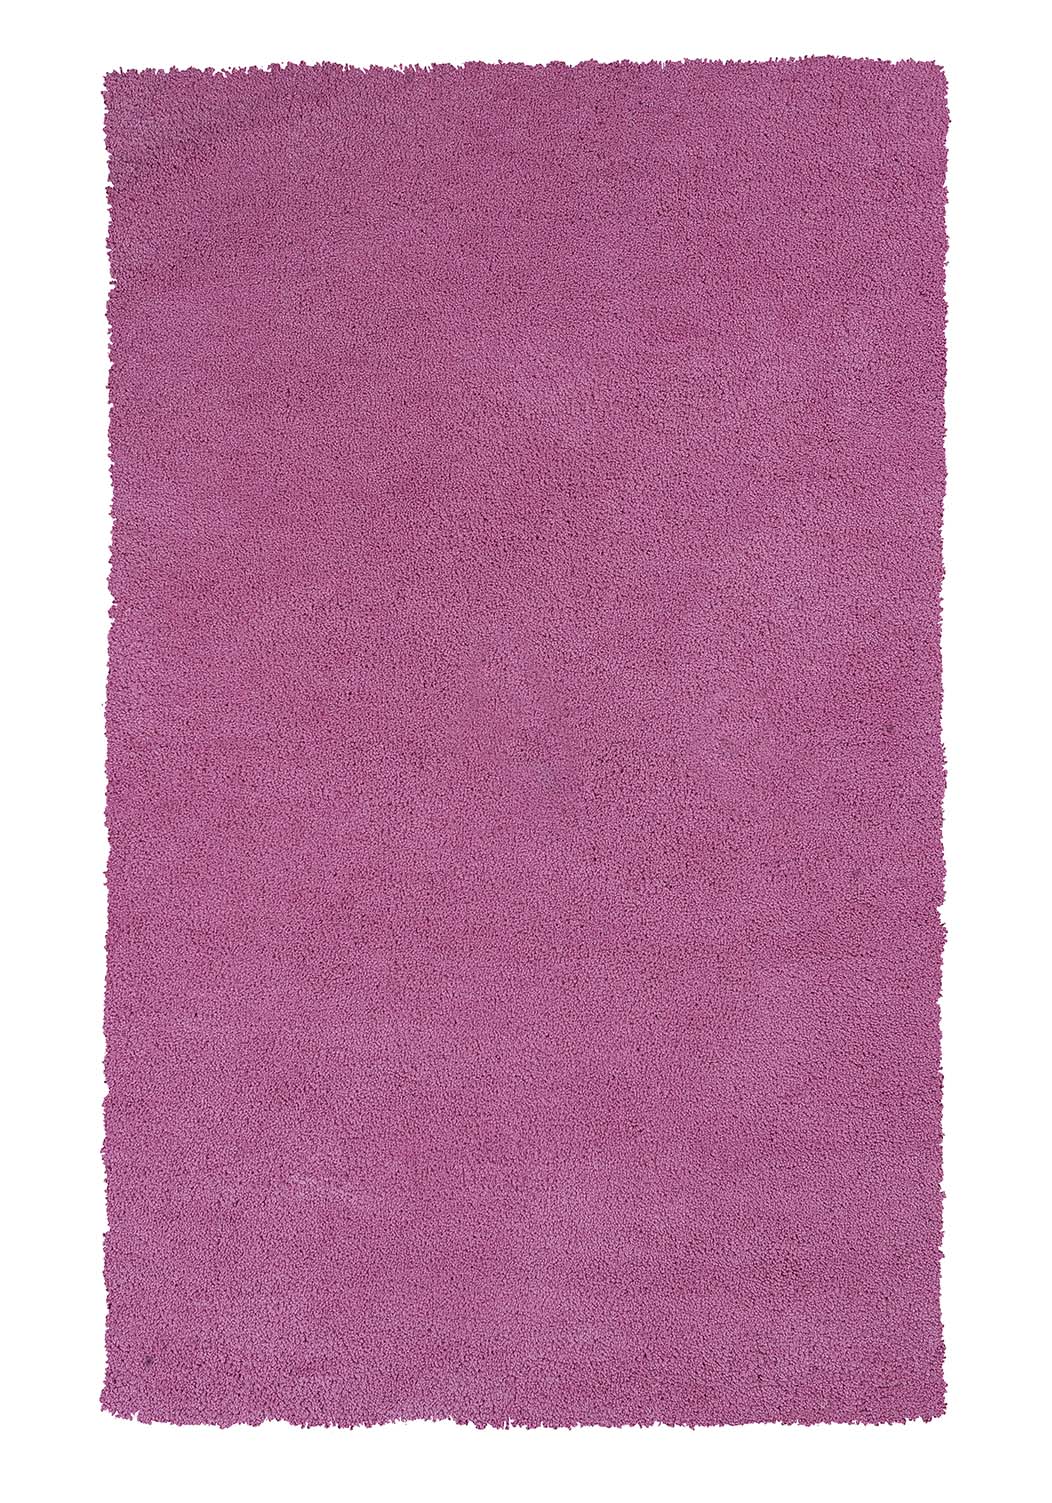 Bliss 1576 Hot Pink Shag Area Rug Product Image